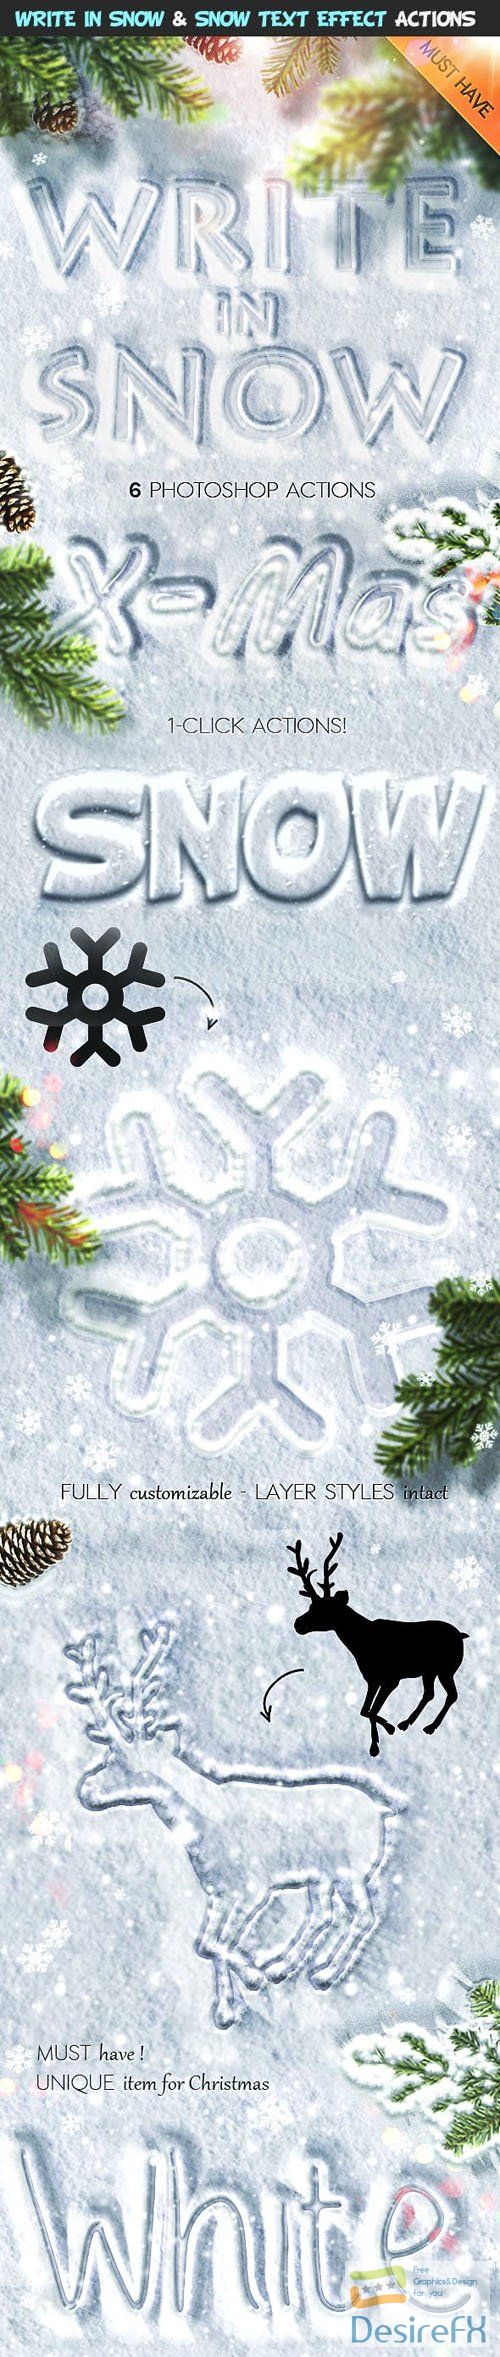 Write in Smow &amp; Snow Text Effect Photoshop Actions, Brushes &amp; Patterns